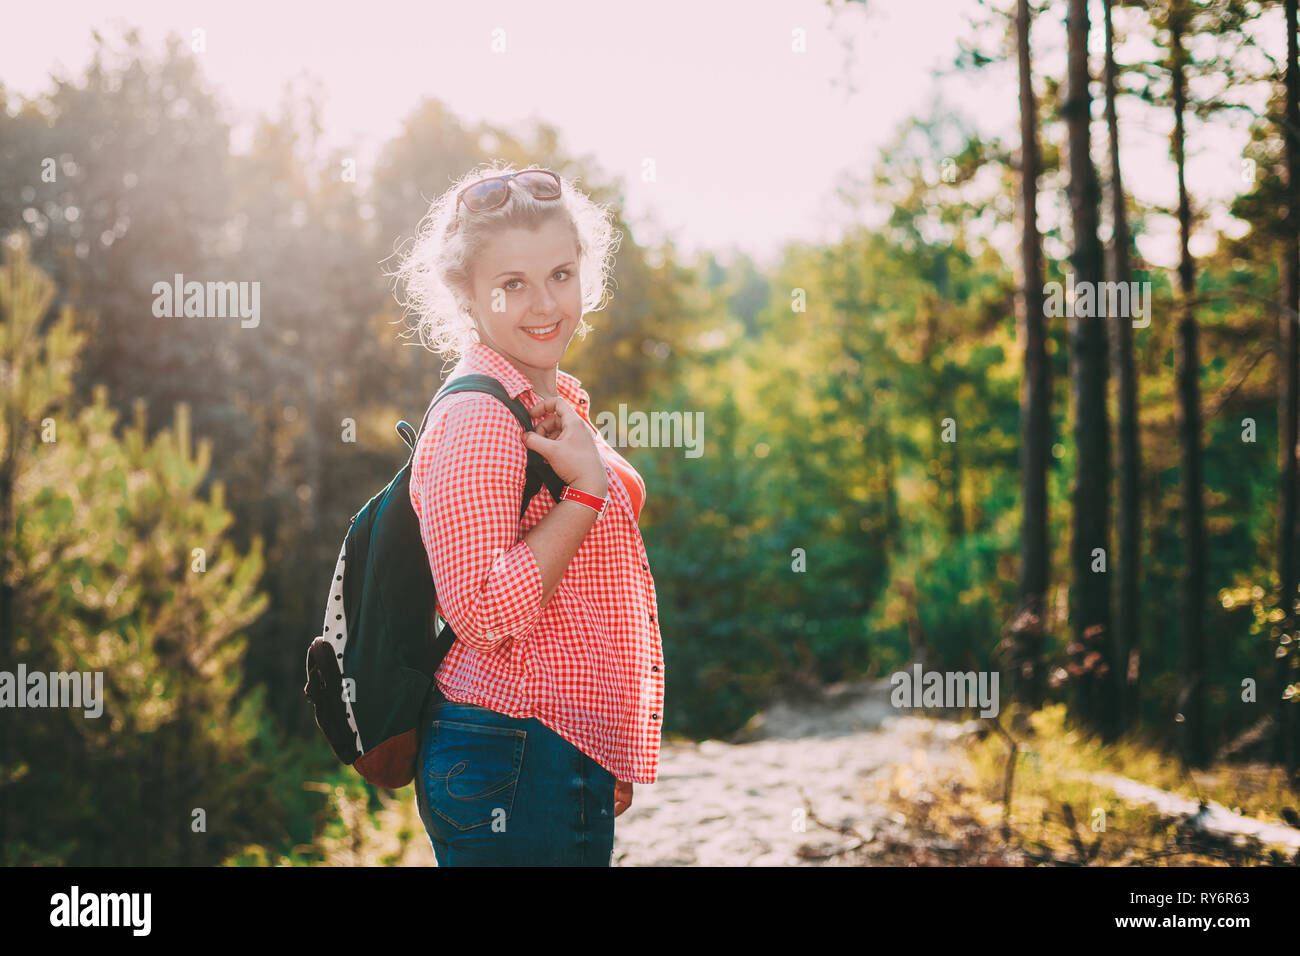 Close Up Beautiful Plus Size Young Smiling Woman In Shirt Posing In Summer Forest Stock Photo